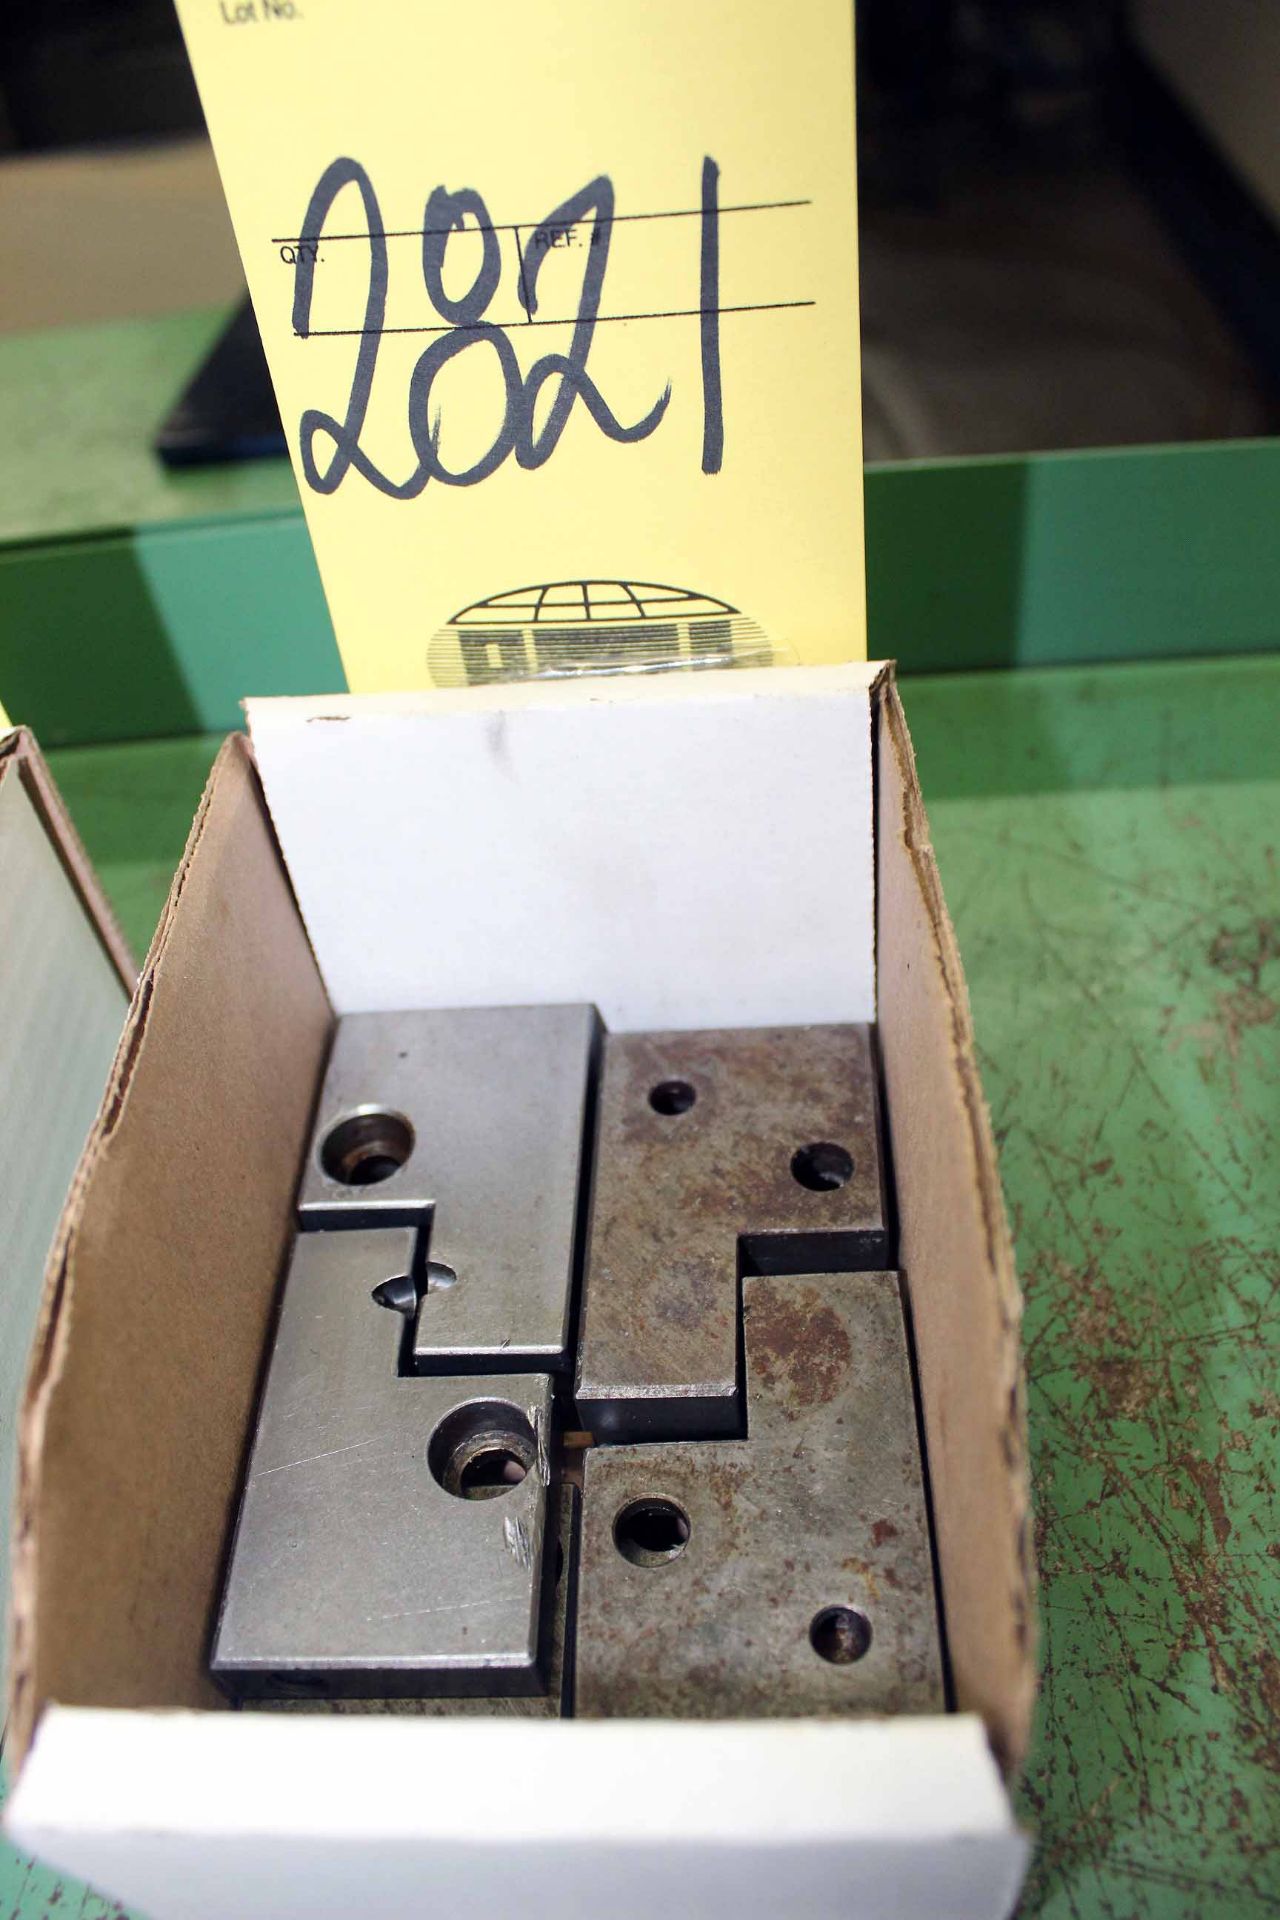 LOT OF THROUGH COOLANT HOLDERS (in one box)